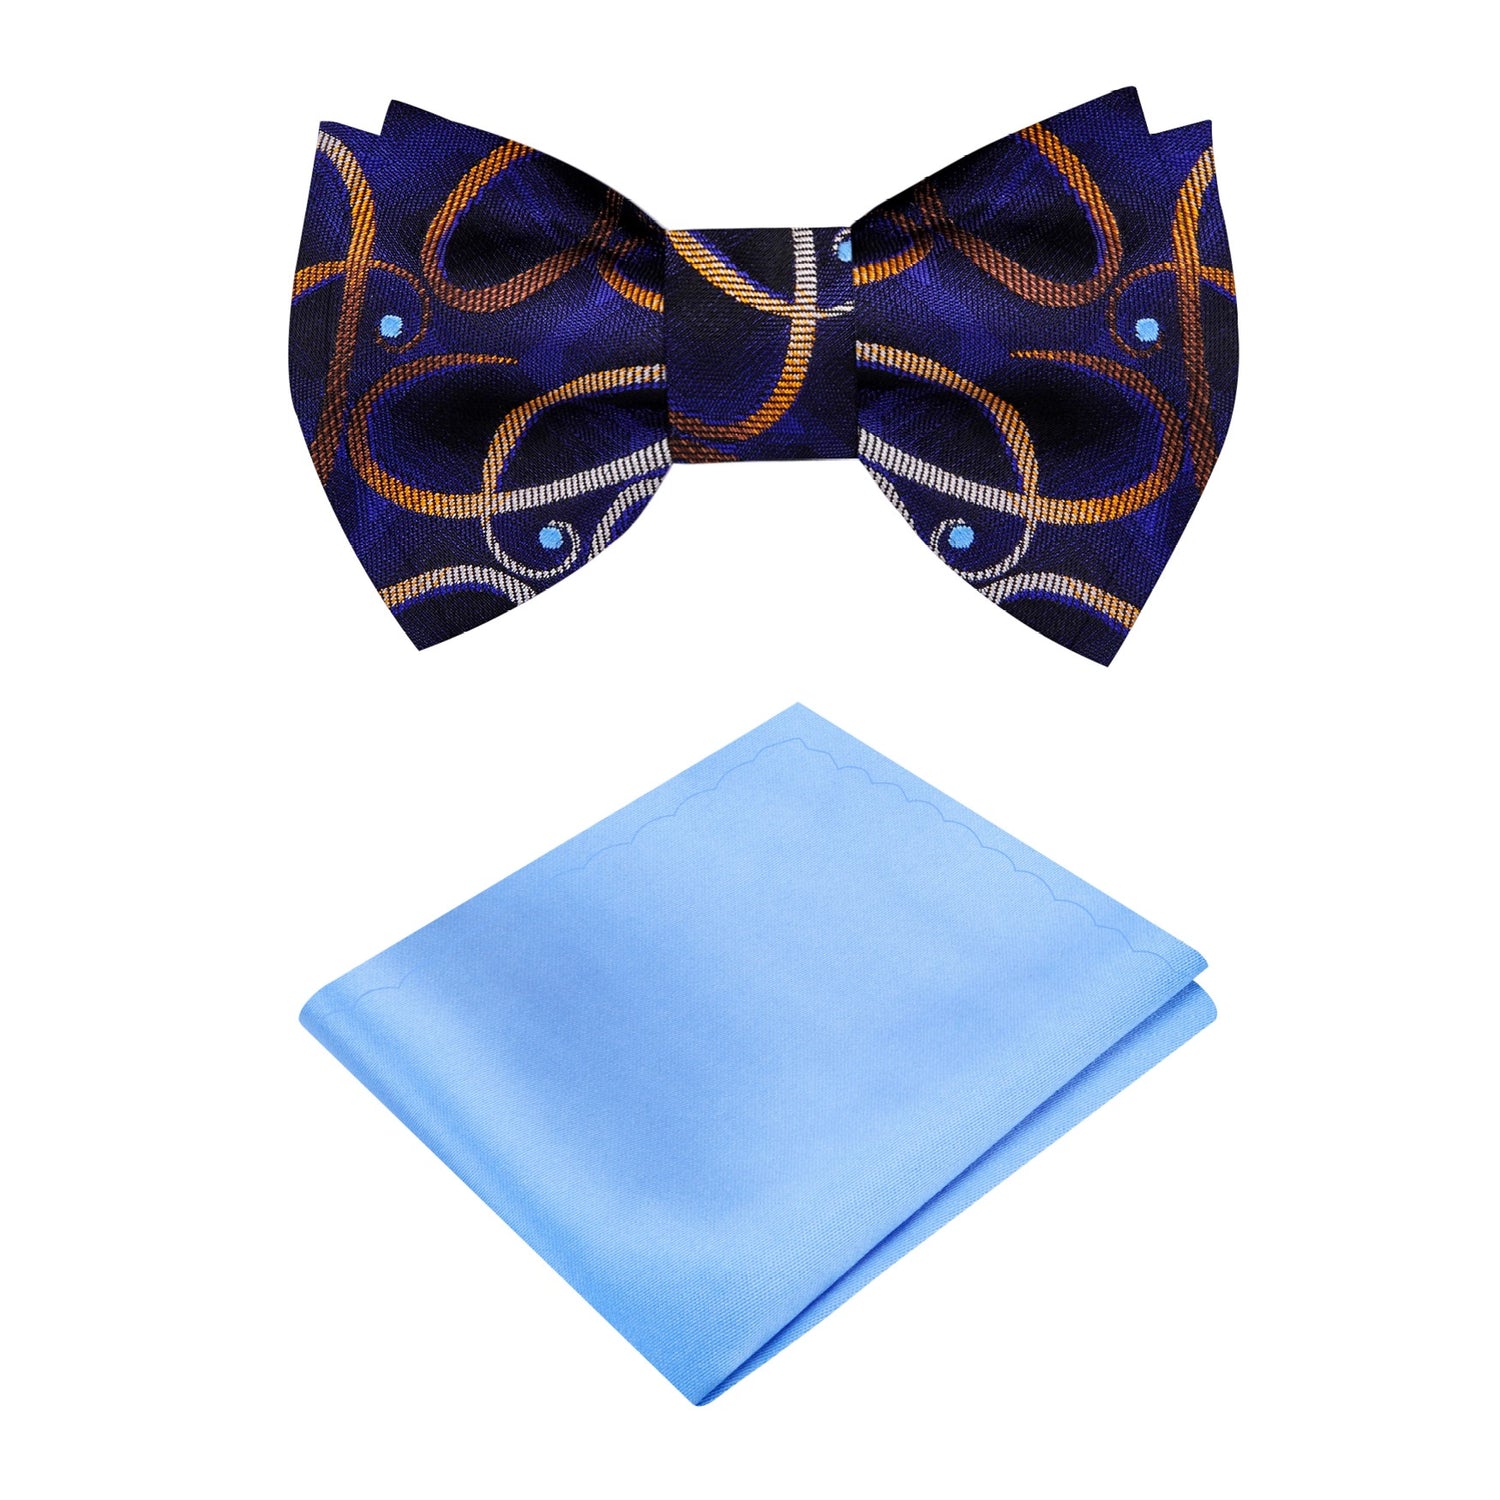 Blue with Golden Brown Paisleys Bow Tie and Light Blue Pocket Square